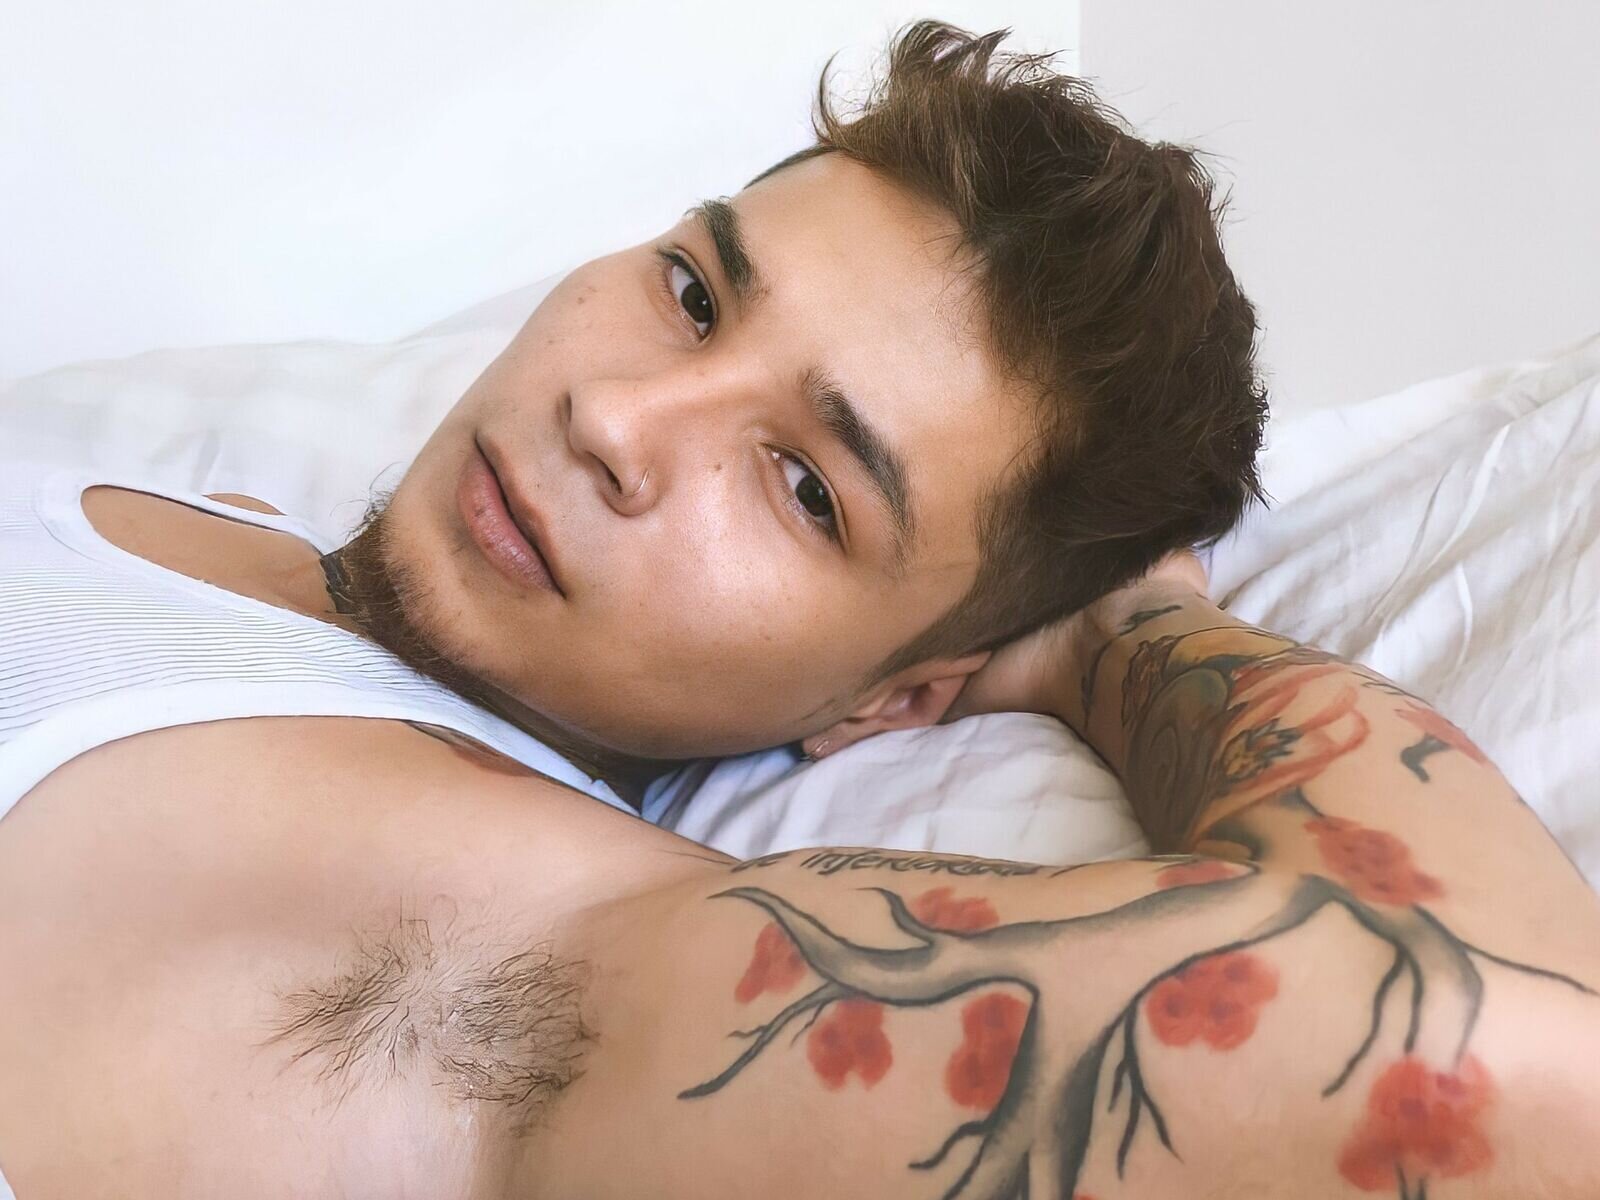 Free Live Sex Chat With MillerHerrnandez